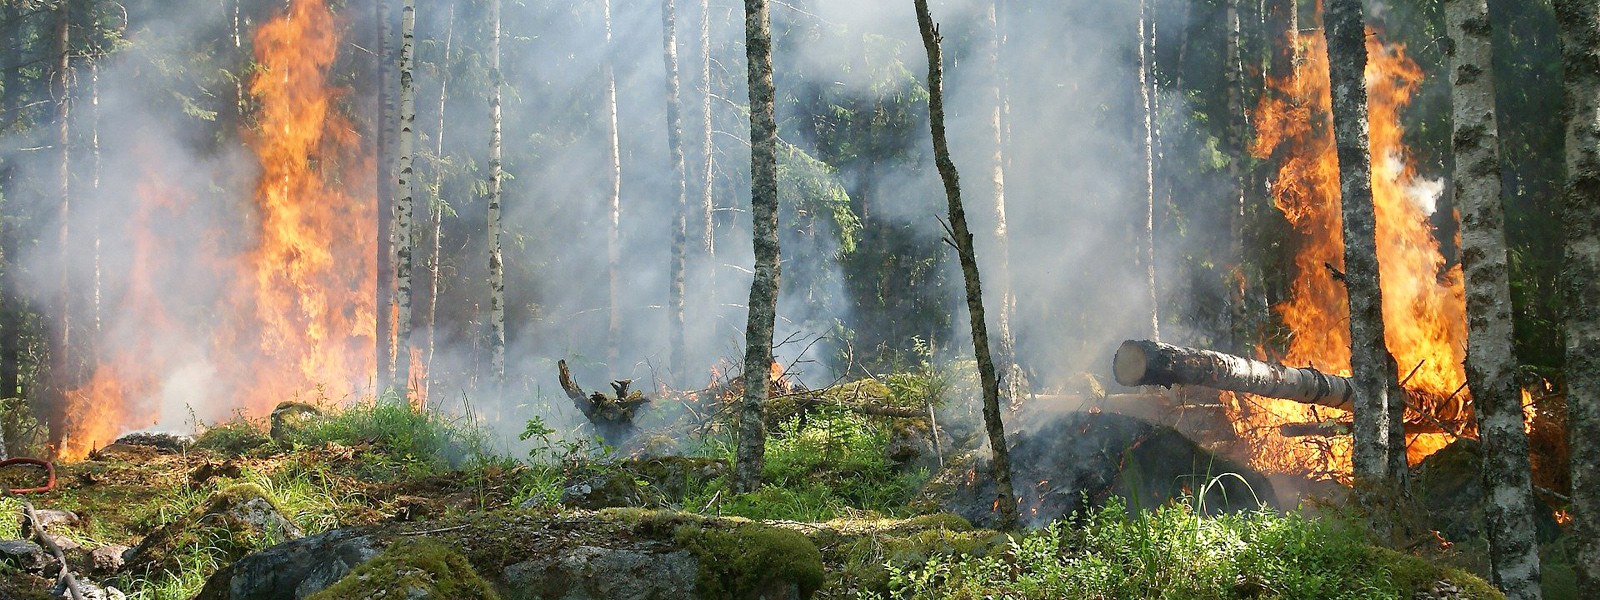 A forest fire with damaged trees and smoke